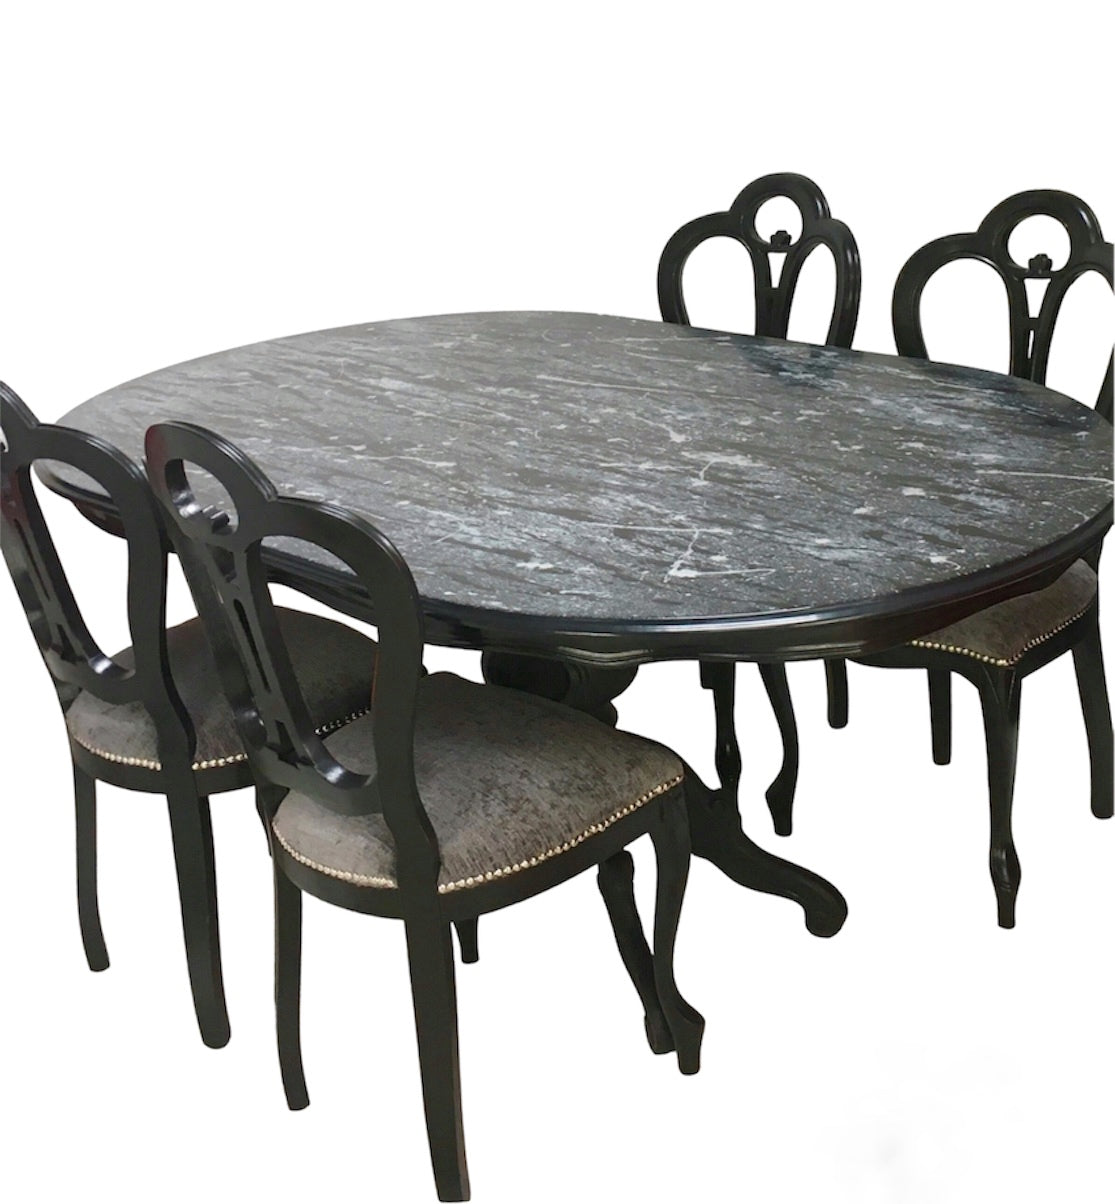 Epoxy Resin Dining Table Black, White, Grey, Silver Design And 4 Chairs